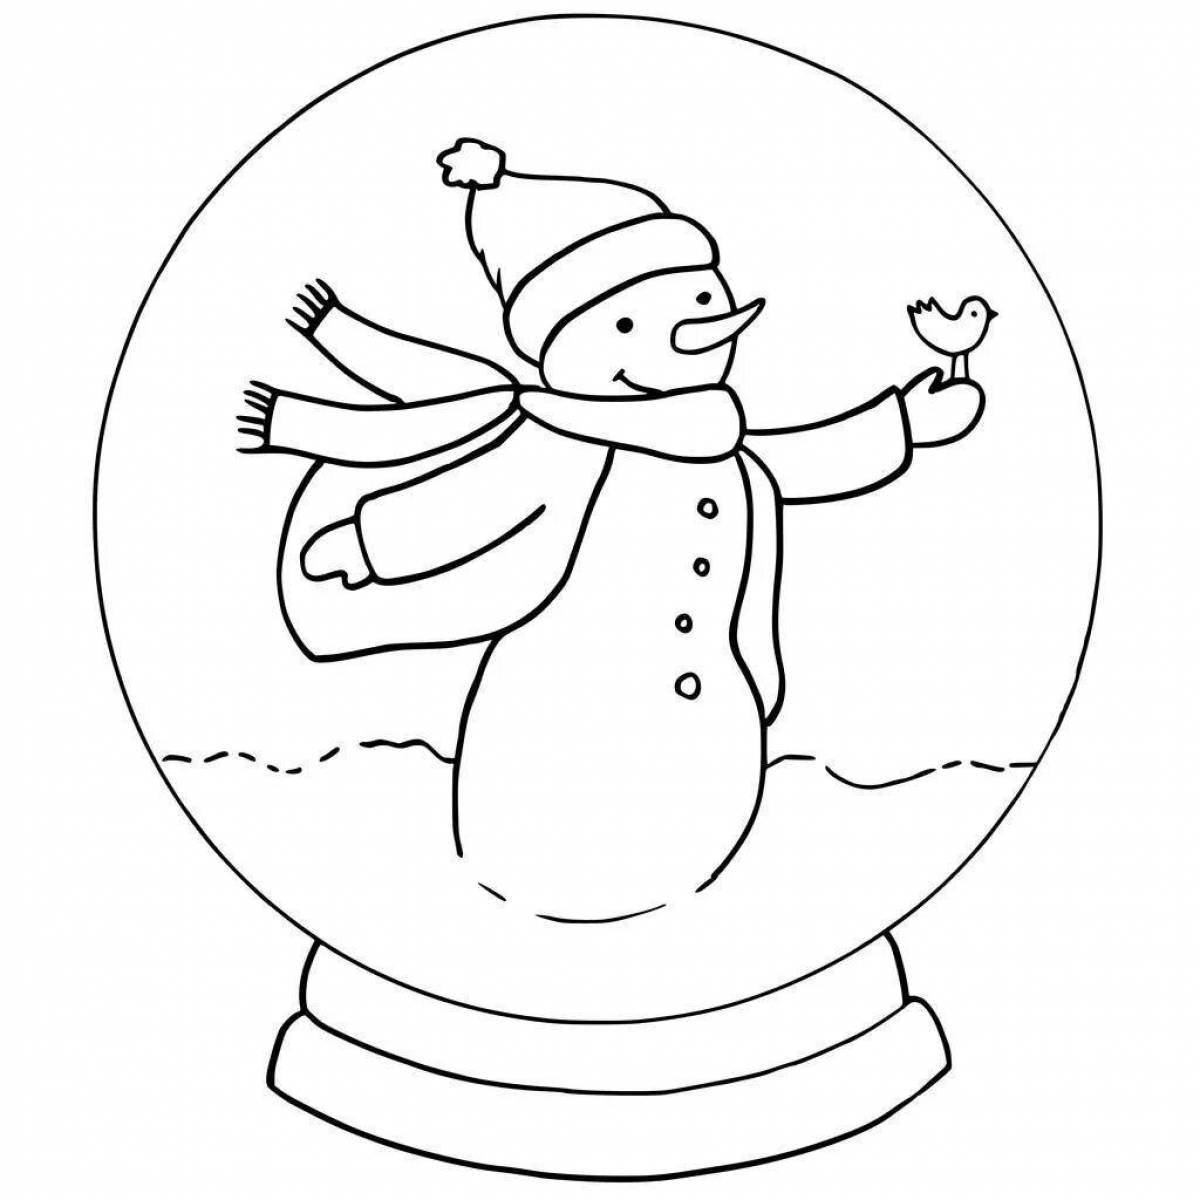 Innovative snowball coloring page